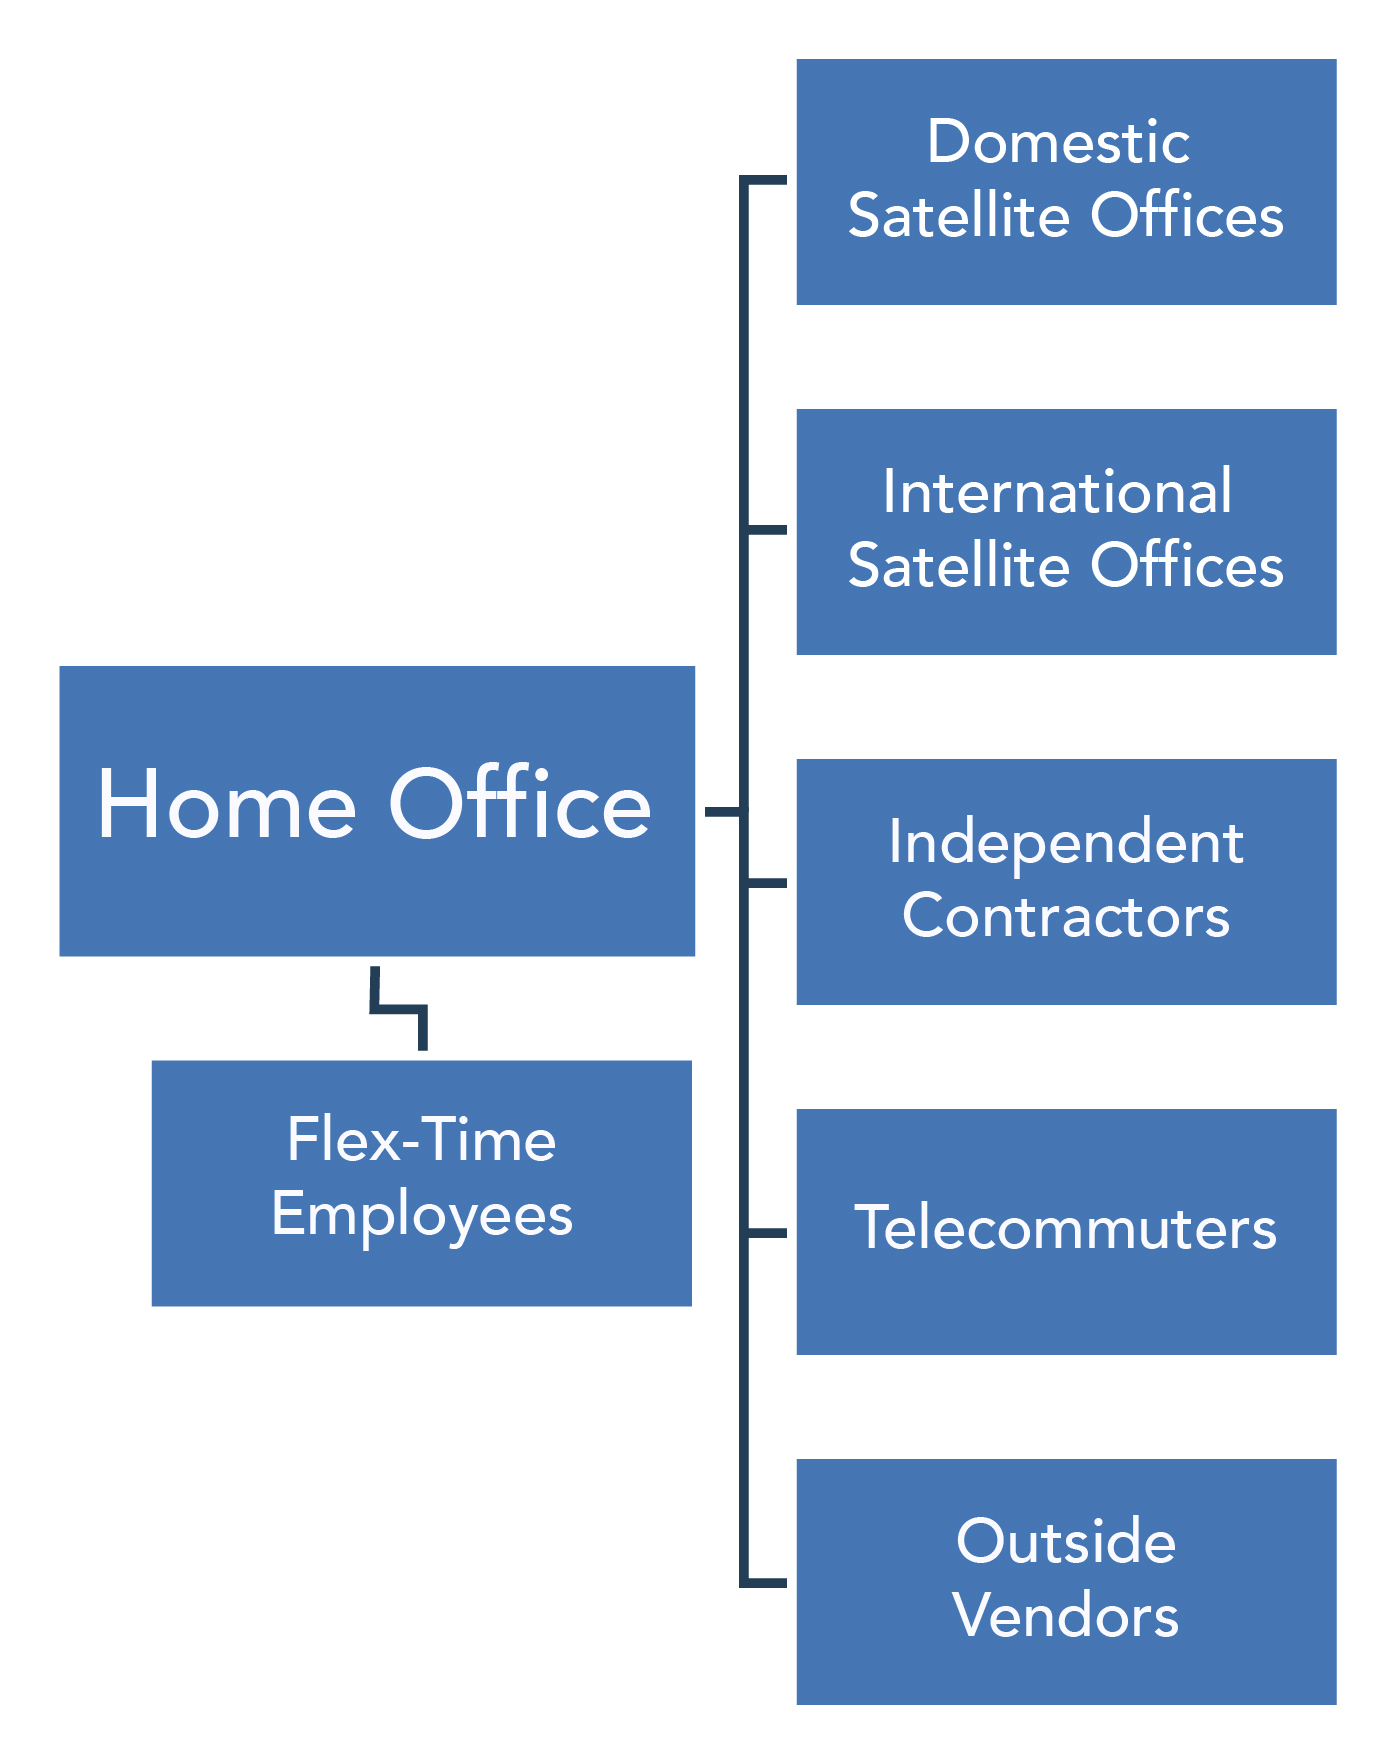 The home office has flex-time employees. There are also domestic satellite offices, international satellite offices, independent contractors, telecommuters, and outside vendors.